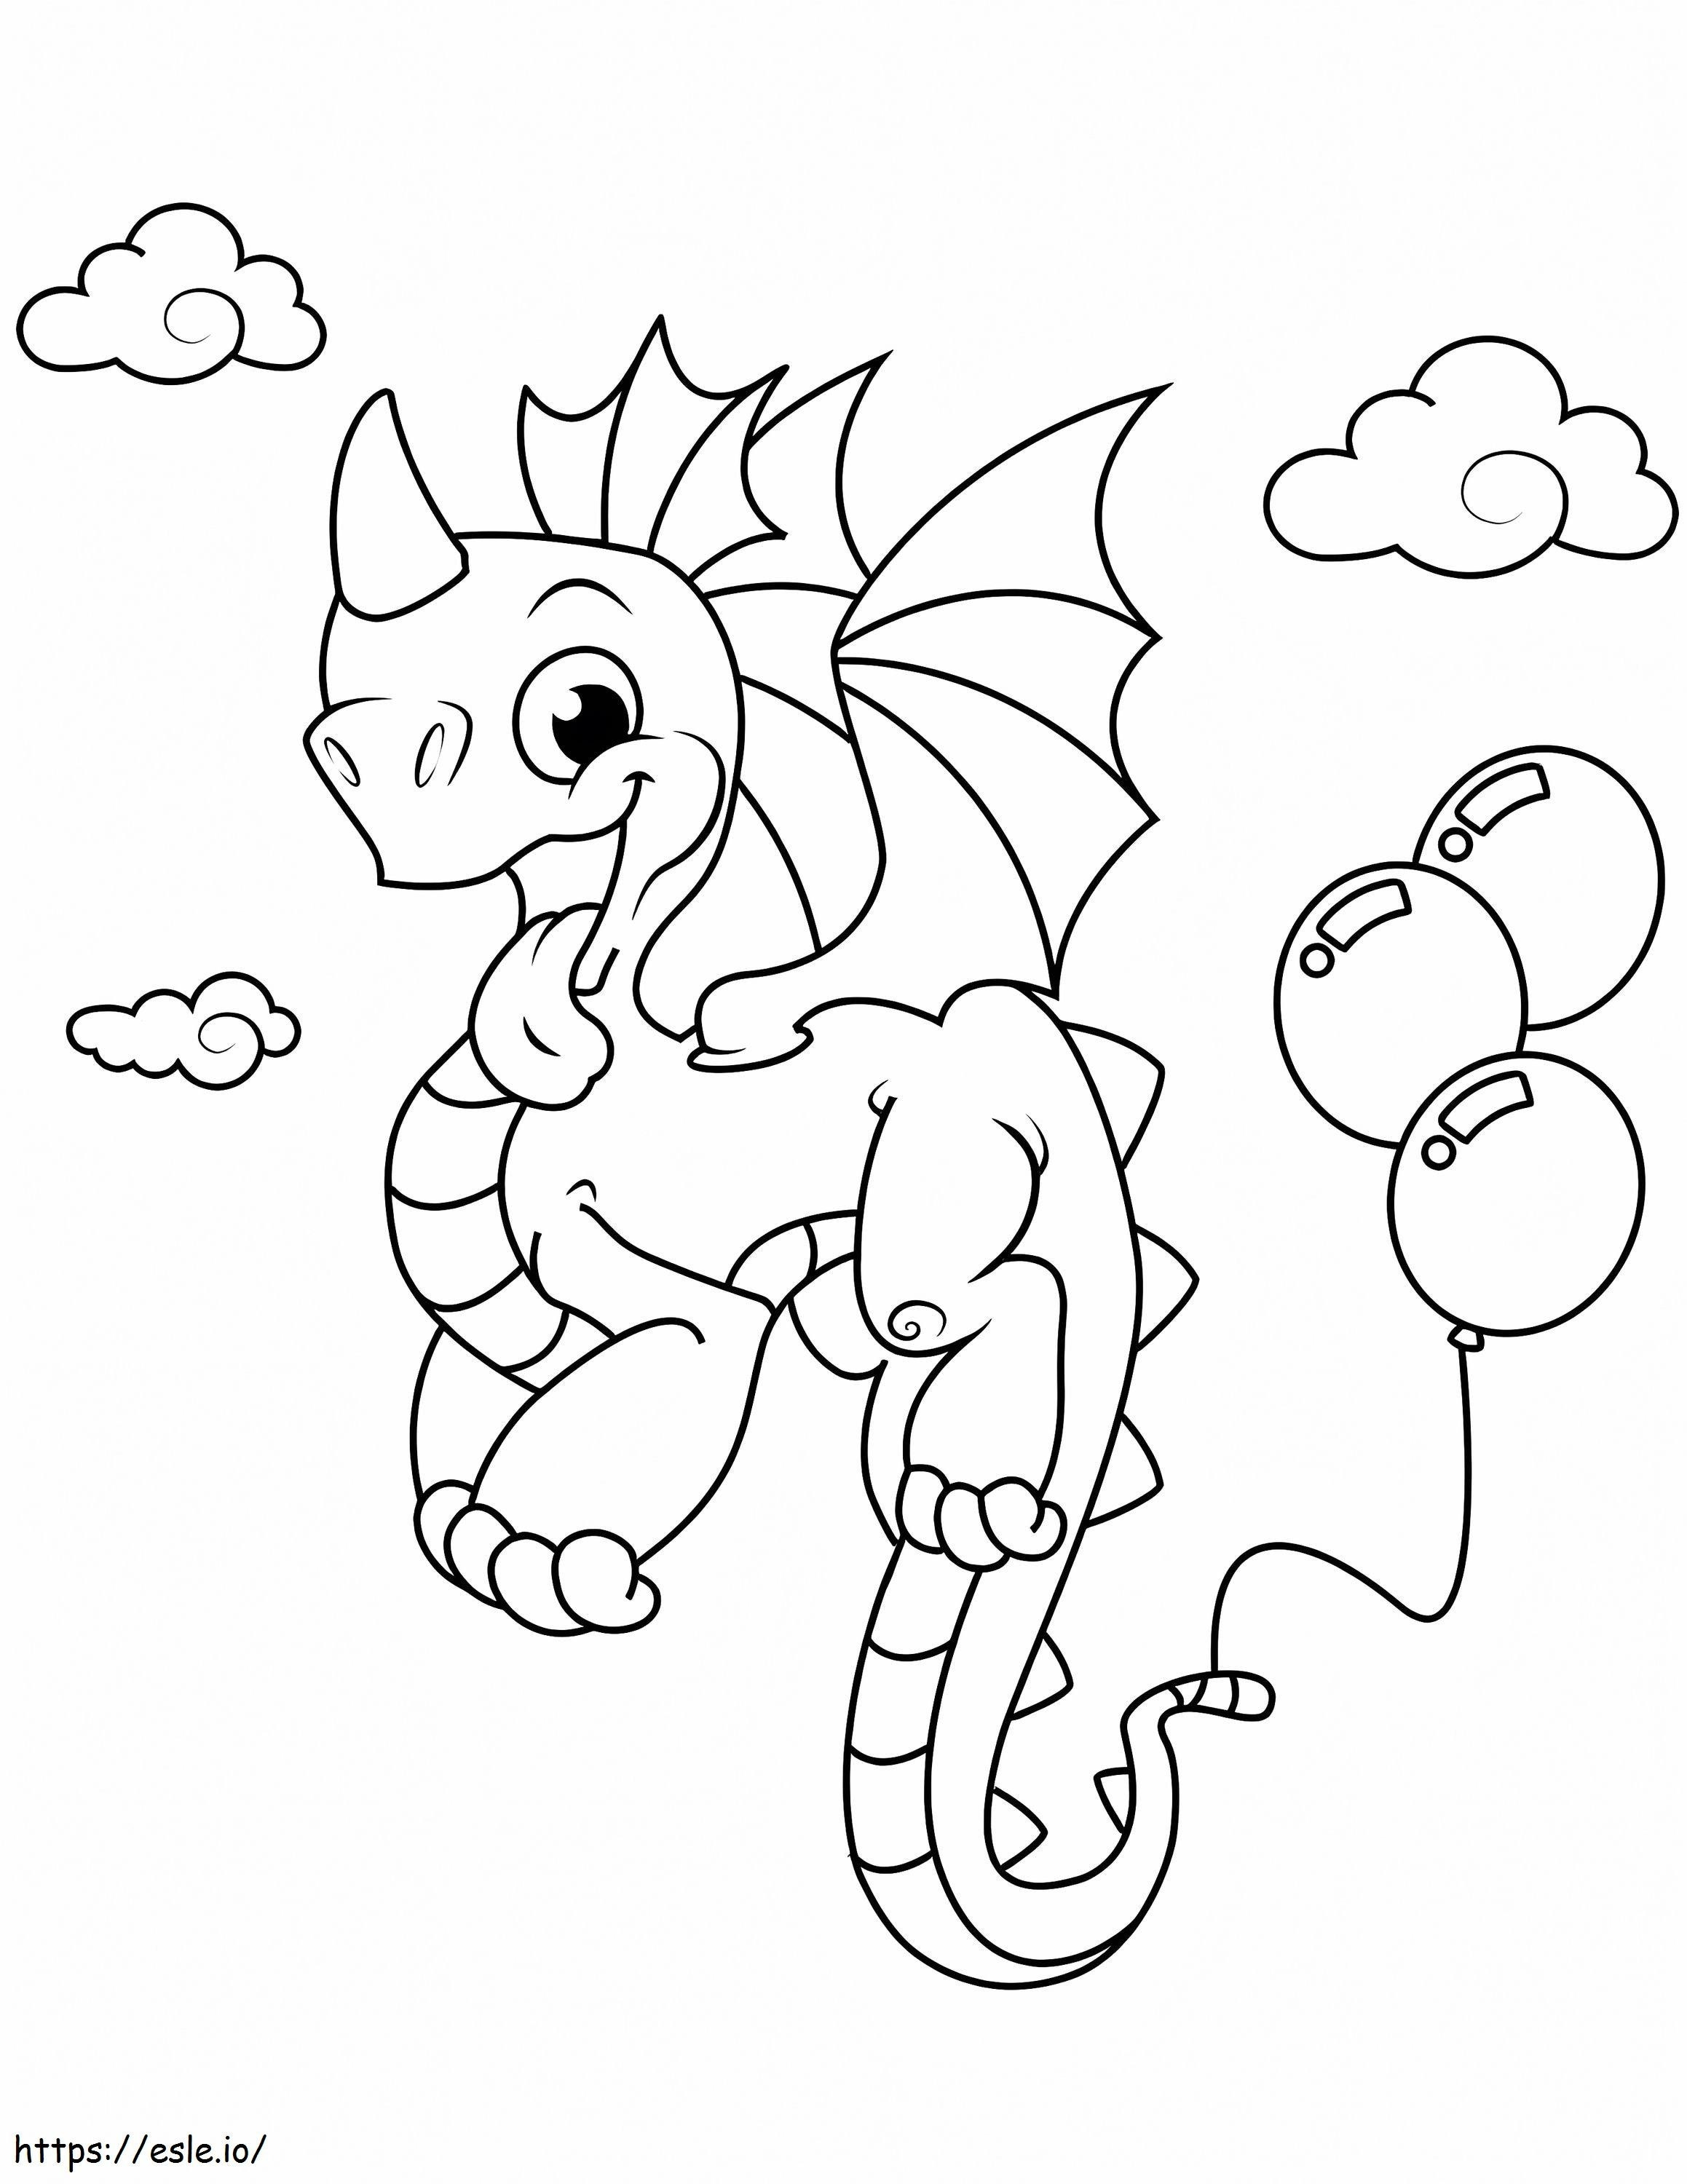 Dragon And Balloons coloring page